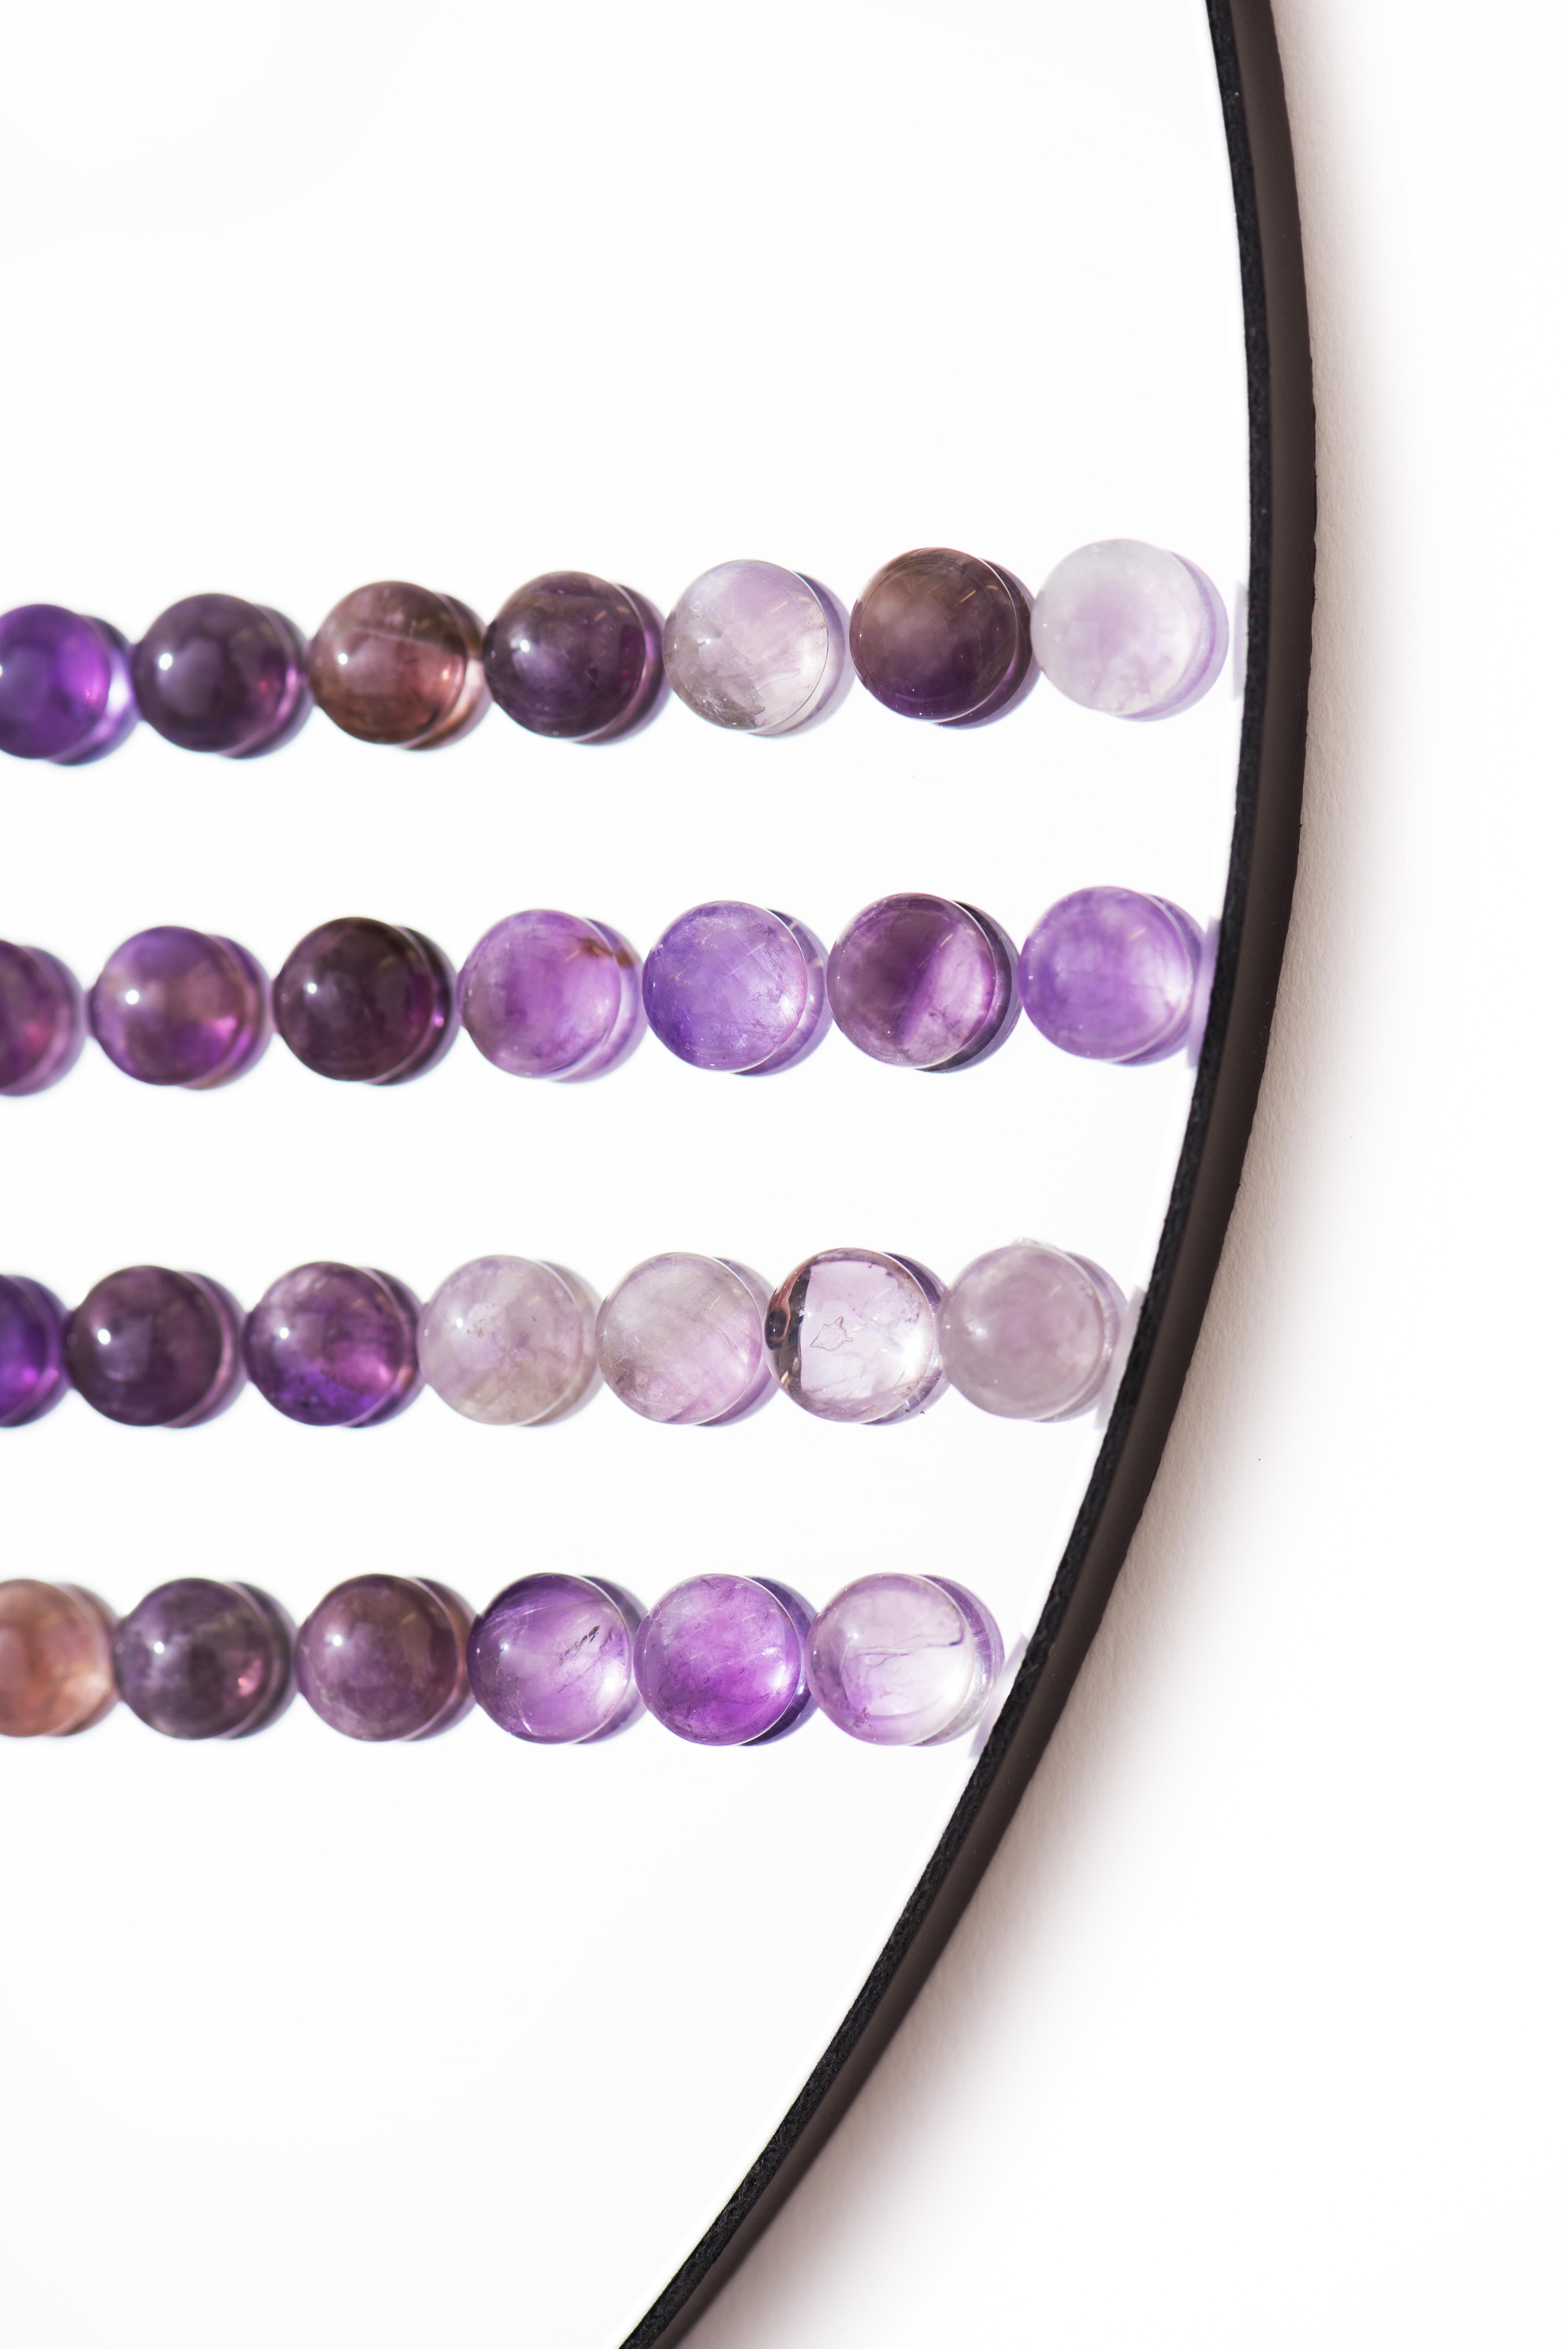 Swiss Composition of Wall Mirrors, Adorned with Amethysts, Handmade by Aline Erbeia For Sale